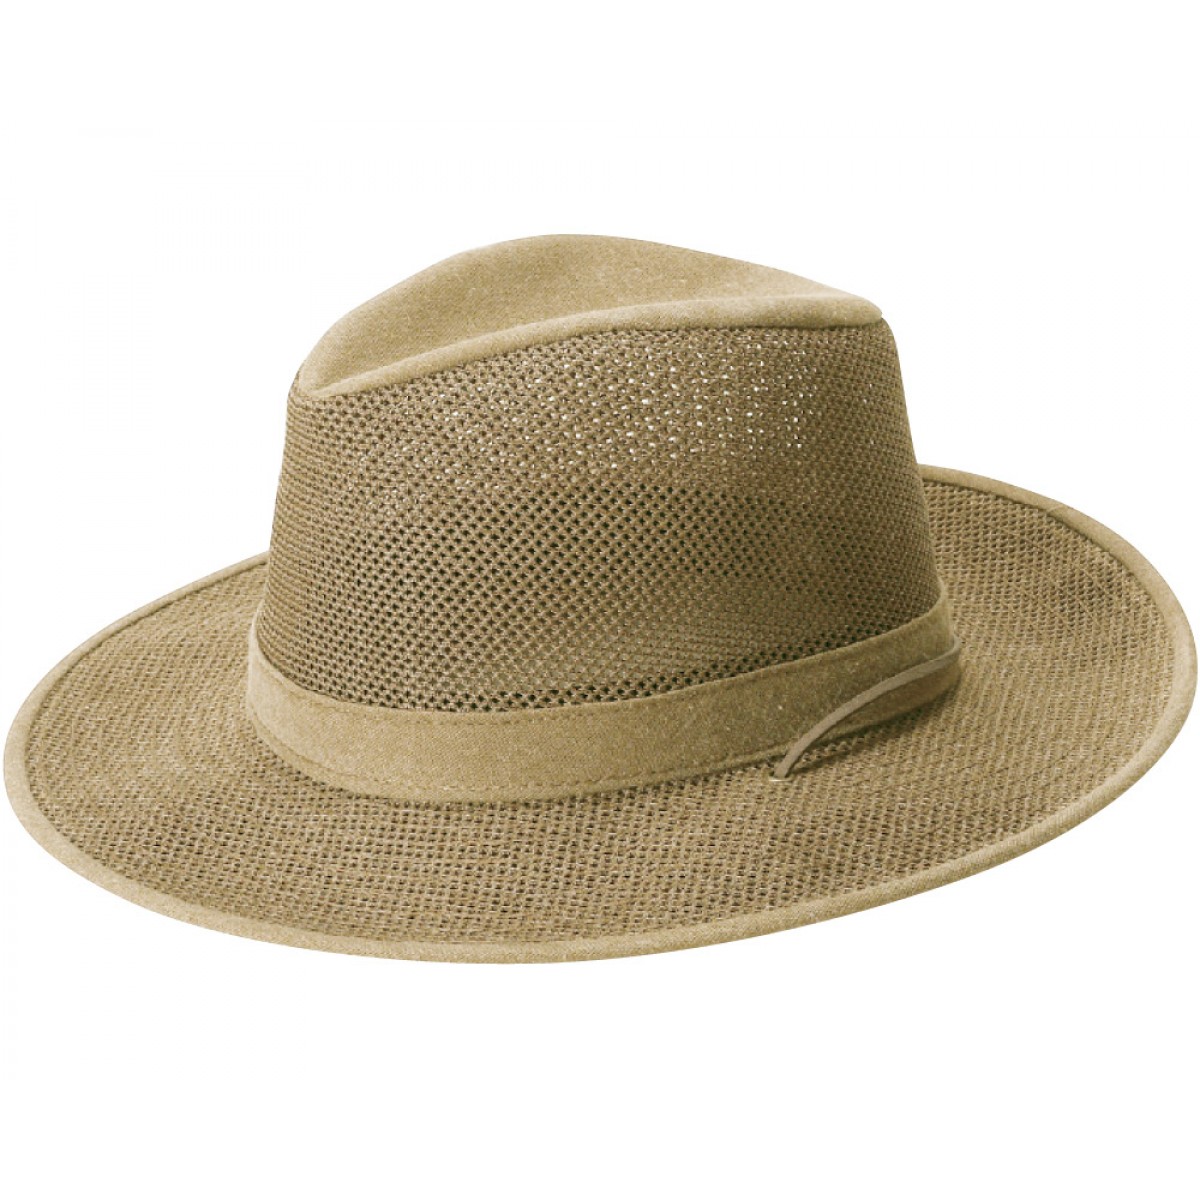 Ventilated Outback Hat